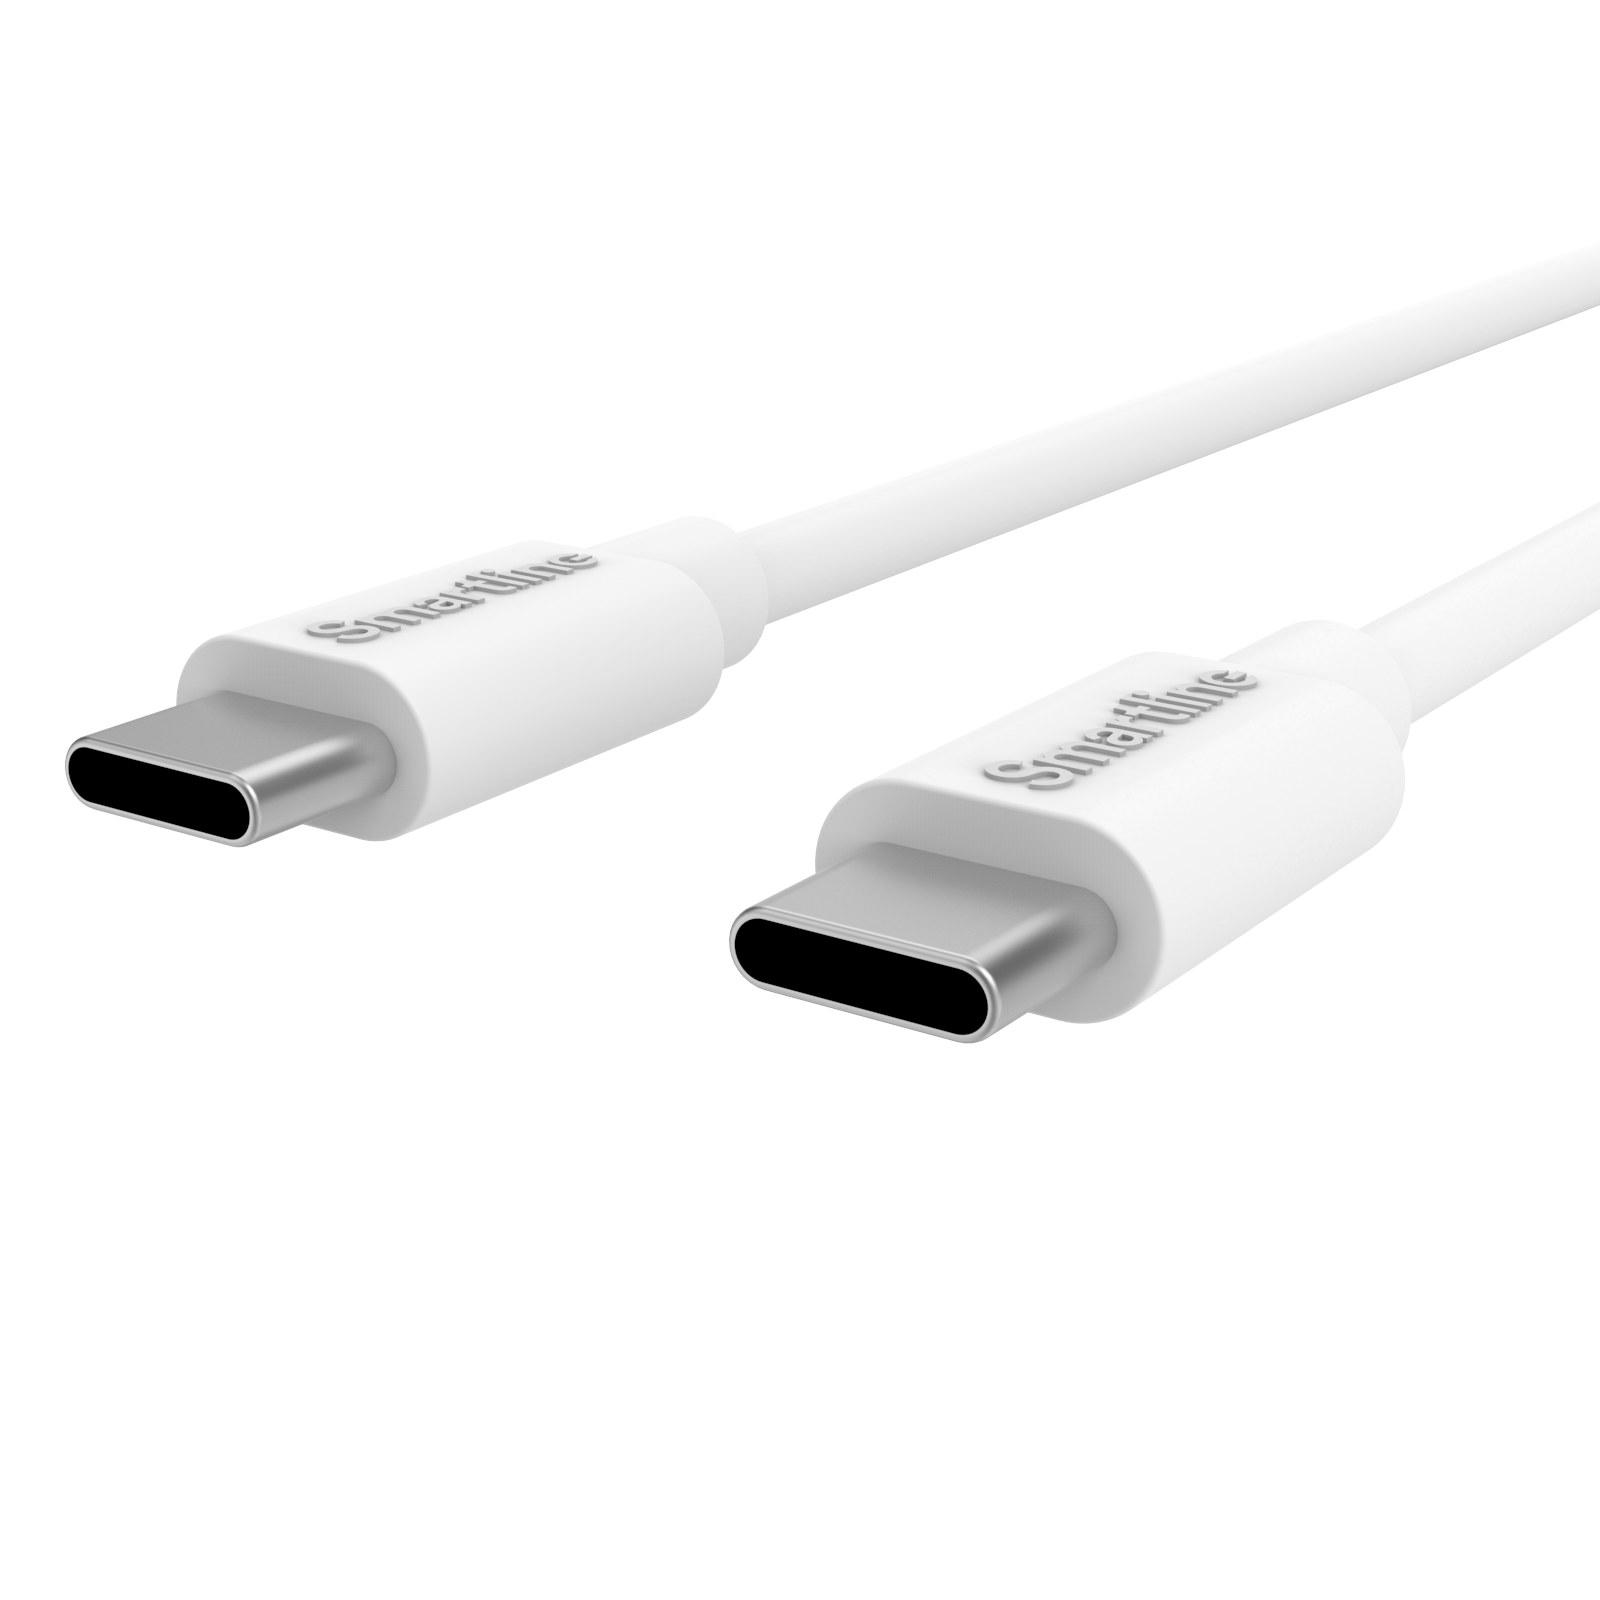 Premium Charger Google Pixel 9 Pro XL - 2 meter Cable and Dual Wall Charger USB-C 35W